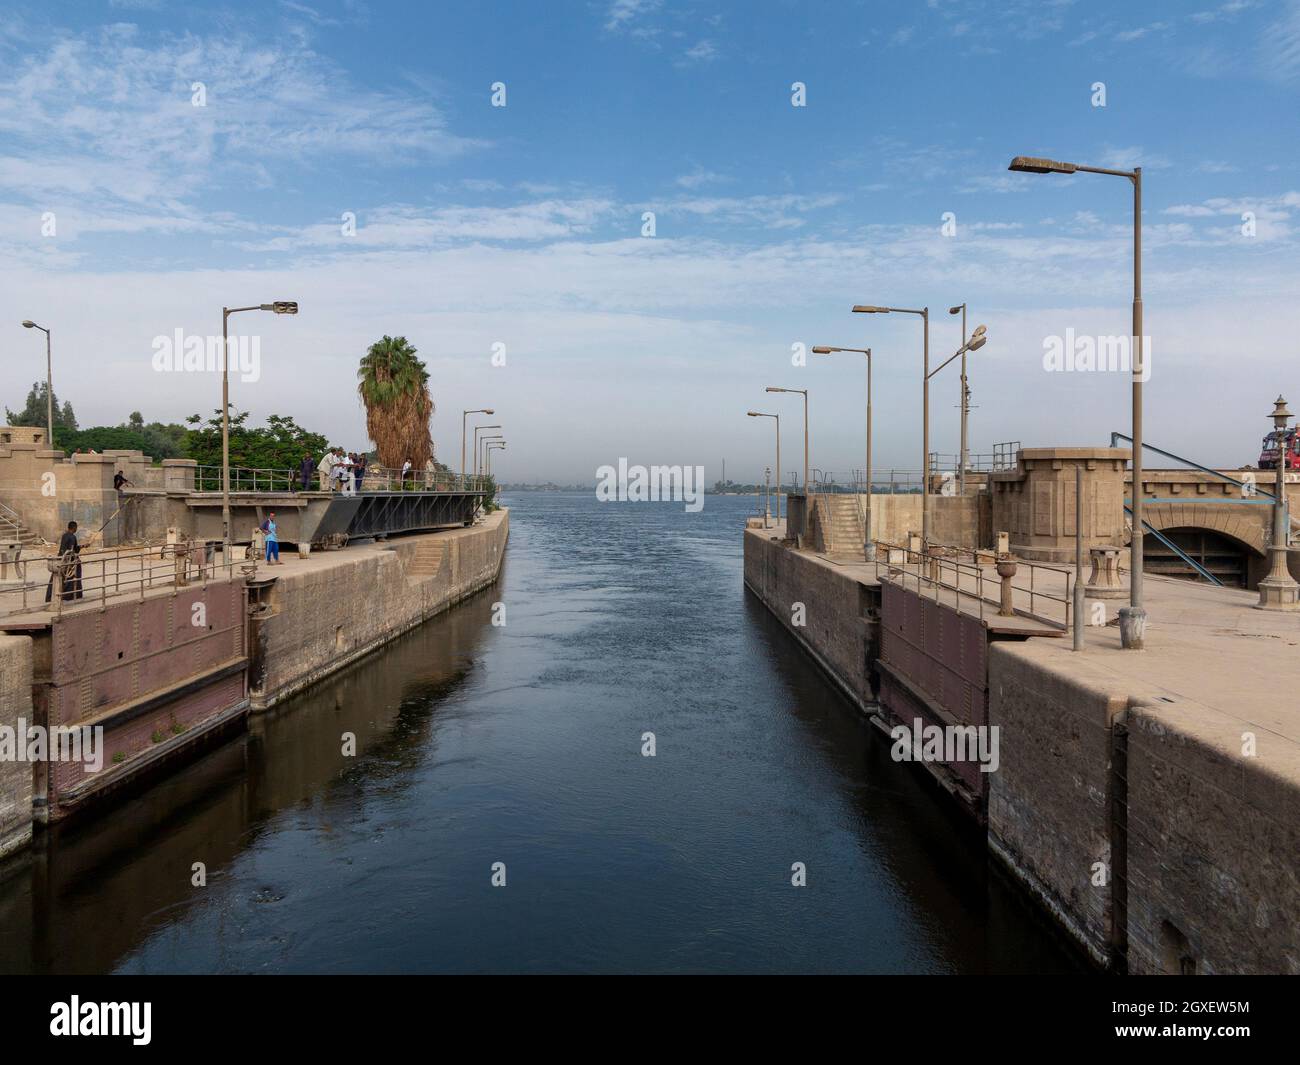 An open lock on the river Nile with workers standing around waiting for the ship to come through Stock Photo